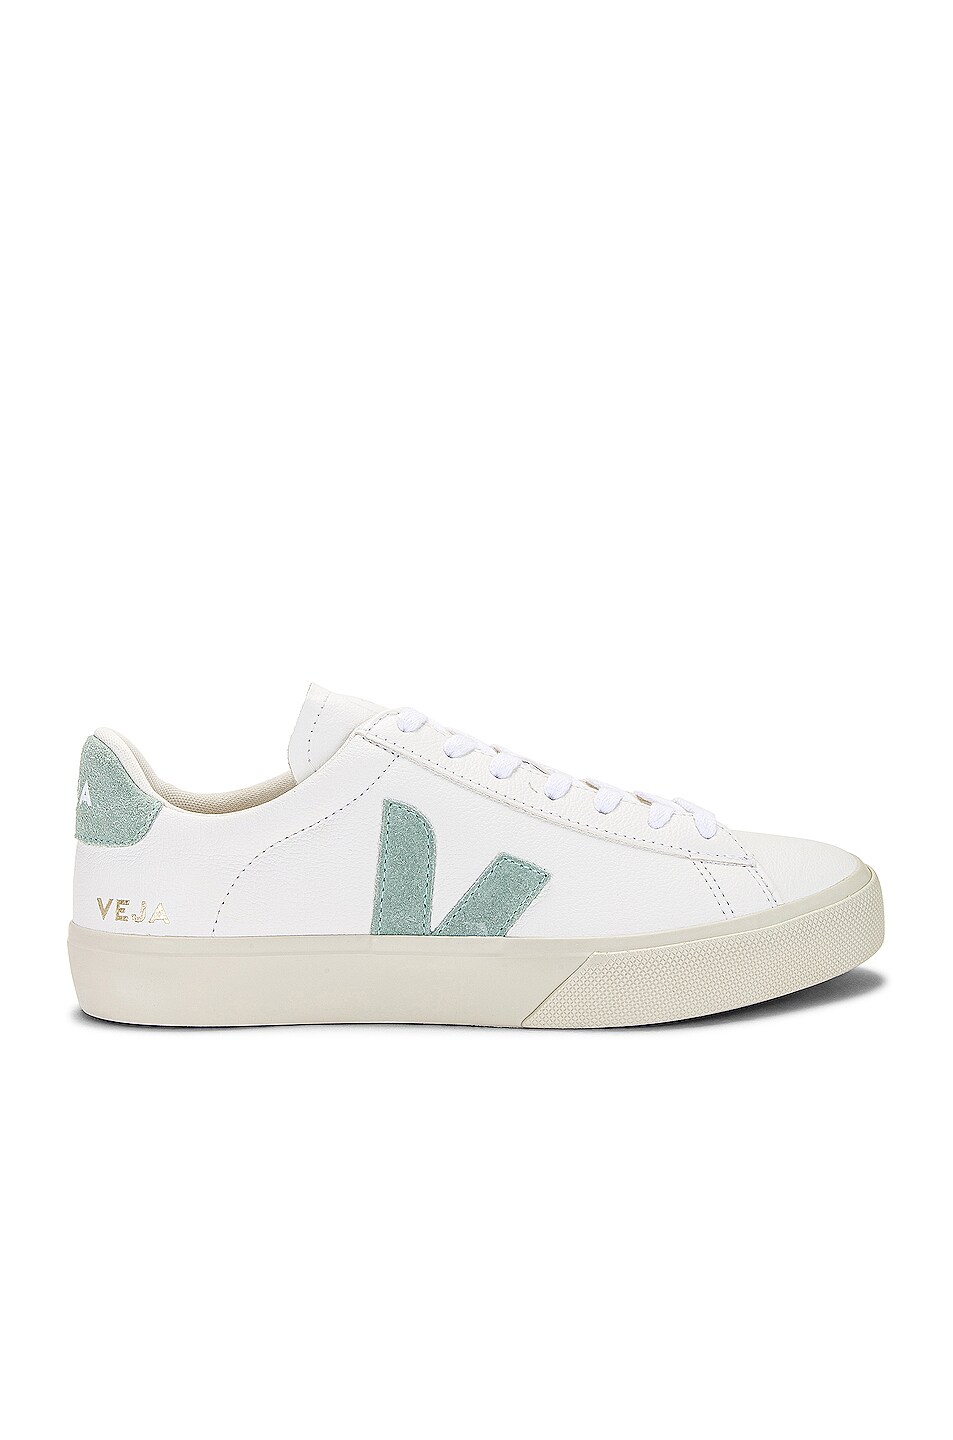 Image 1 of Veja Campo Sneaker in Extra White & Matcha